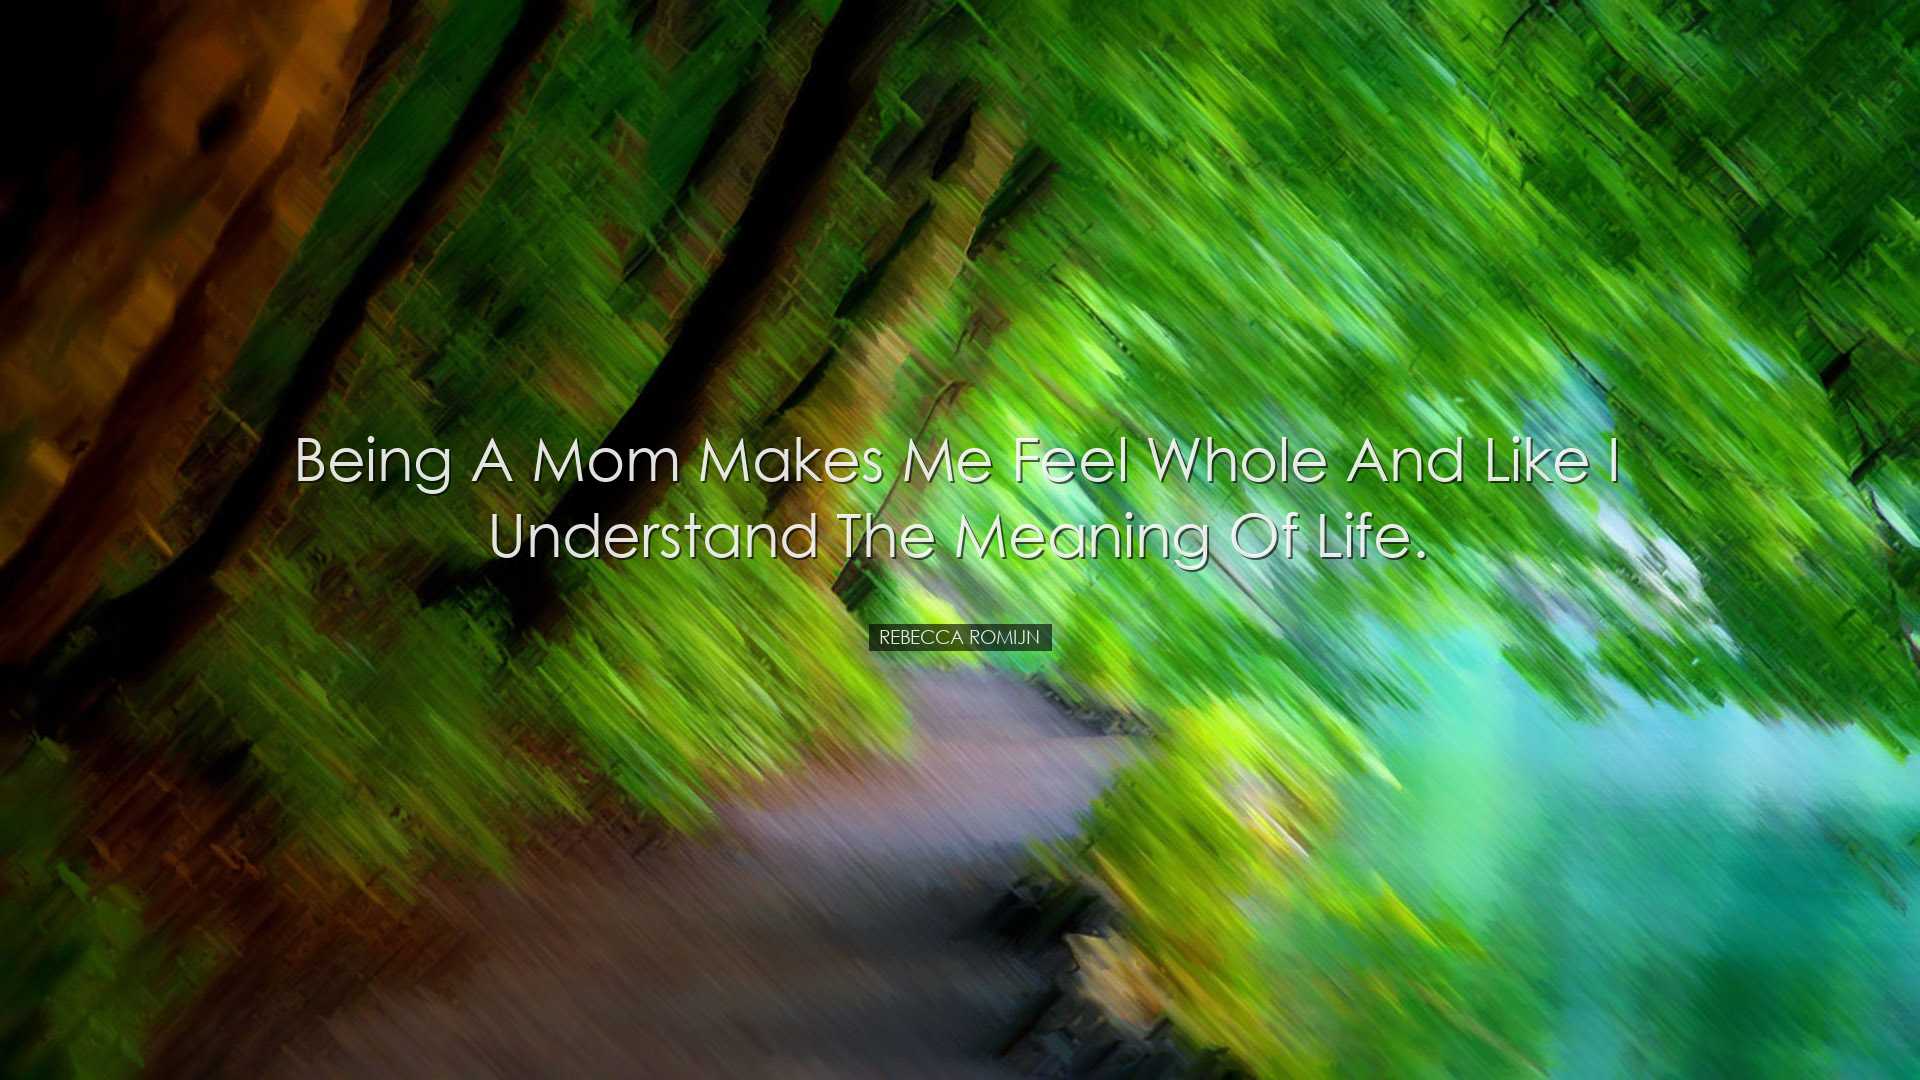 Being a mom makes me feel whole and like I understand the meaning